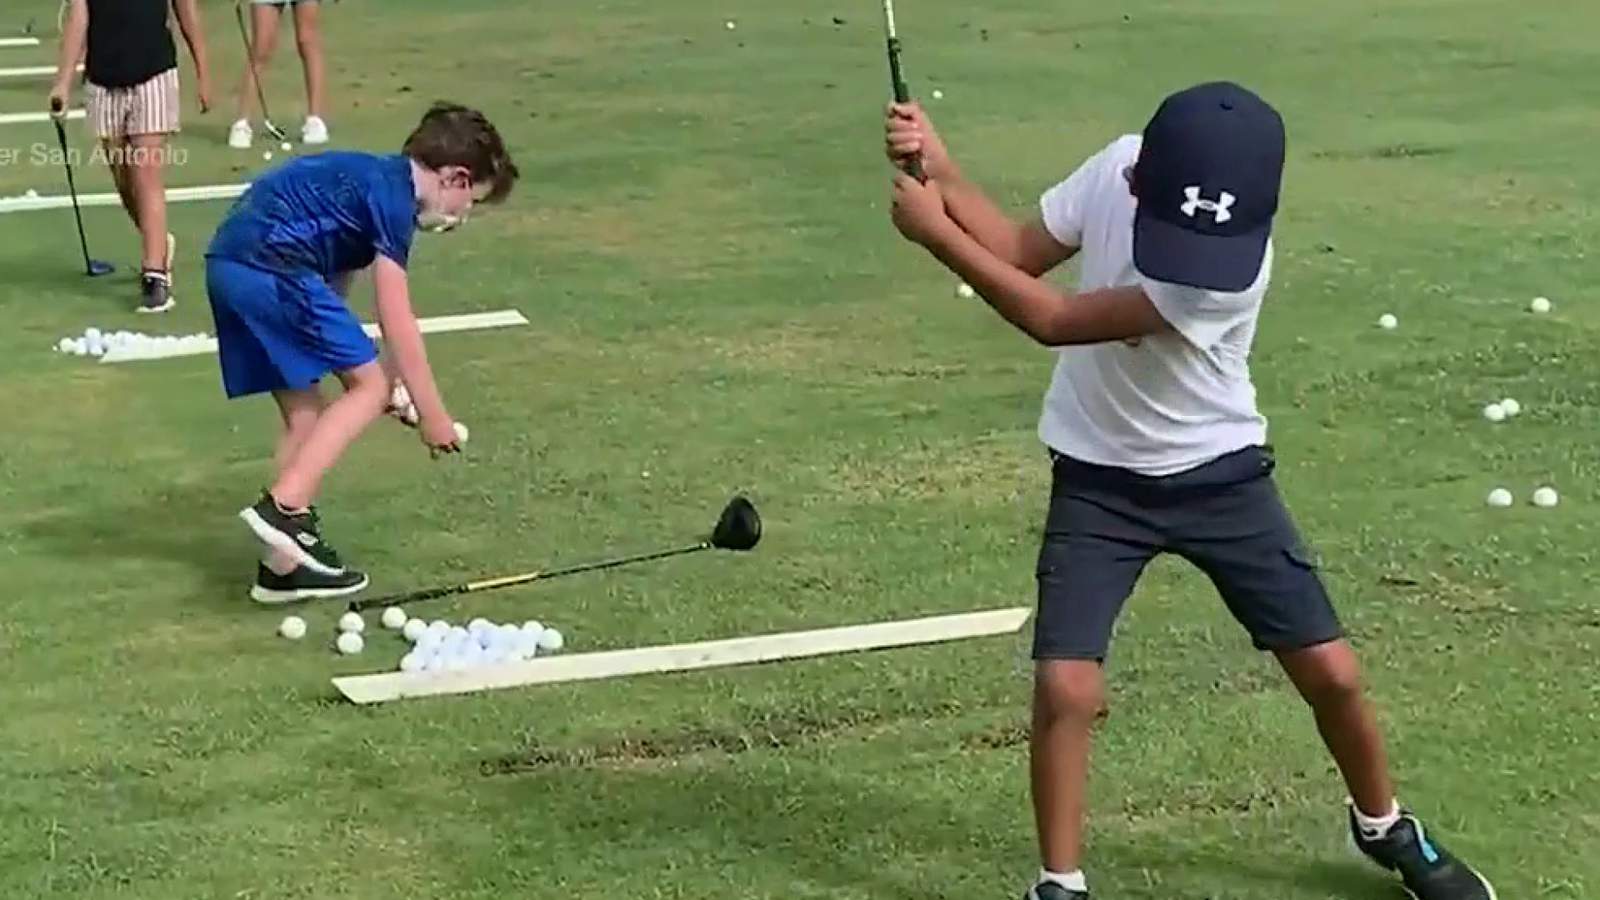 Youth development organization tries to introduce kids to game of golf